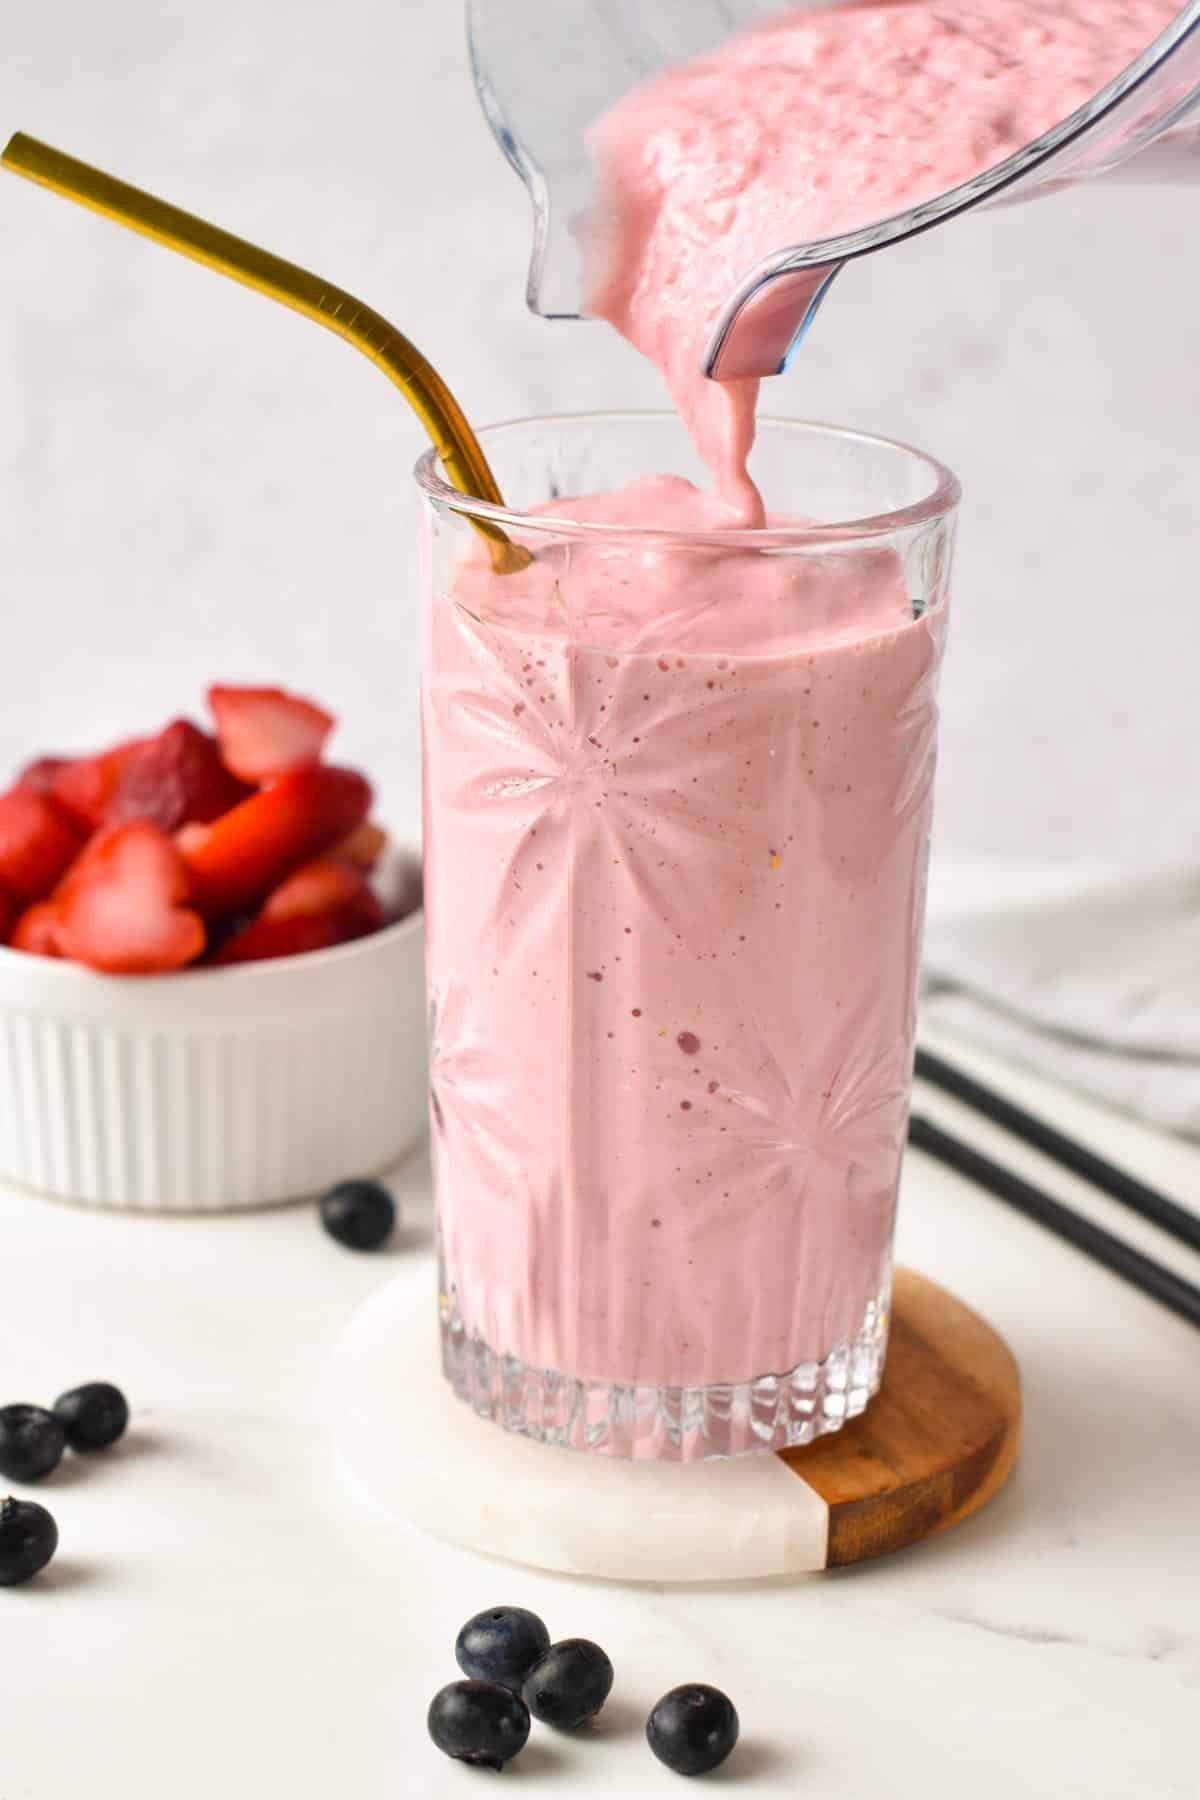 This Cottage Cheese Smoothie is a deliciously thick and creamy high-protein strawberry smoothie made from cottage cheese. With 14 grams of proteins, this is the perfect post work out snack.